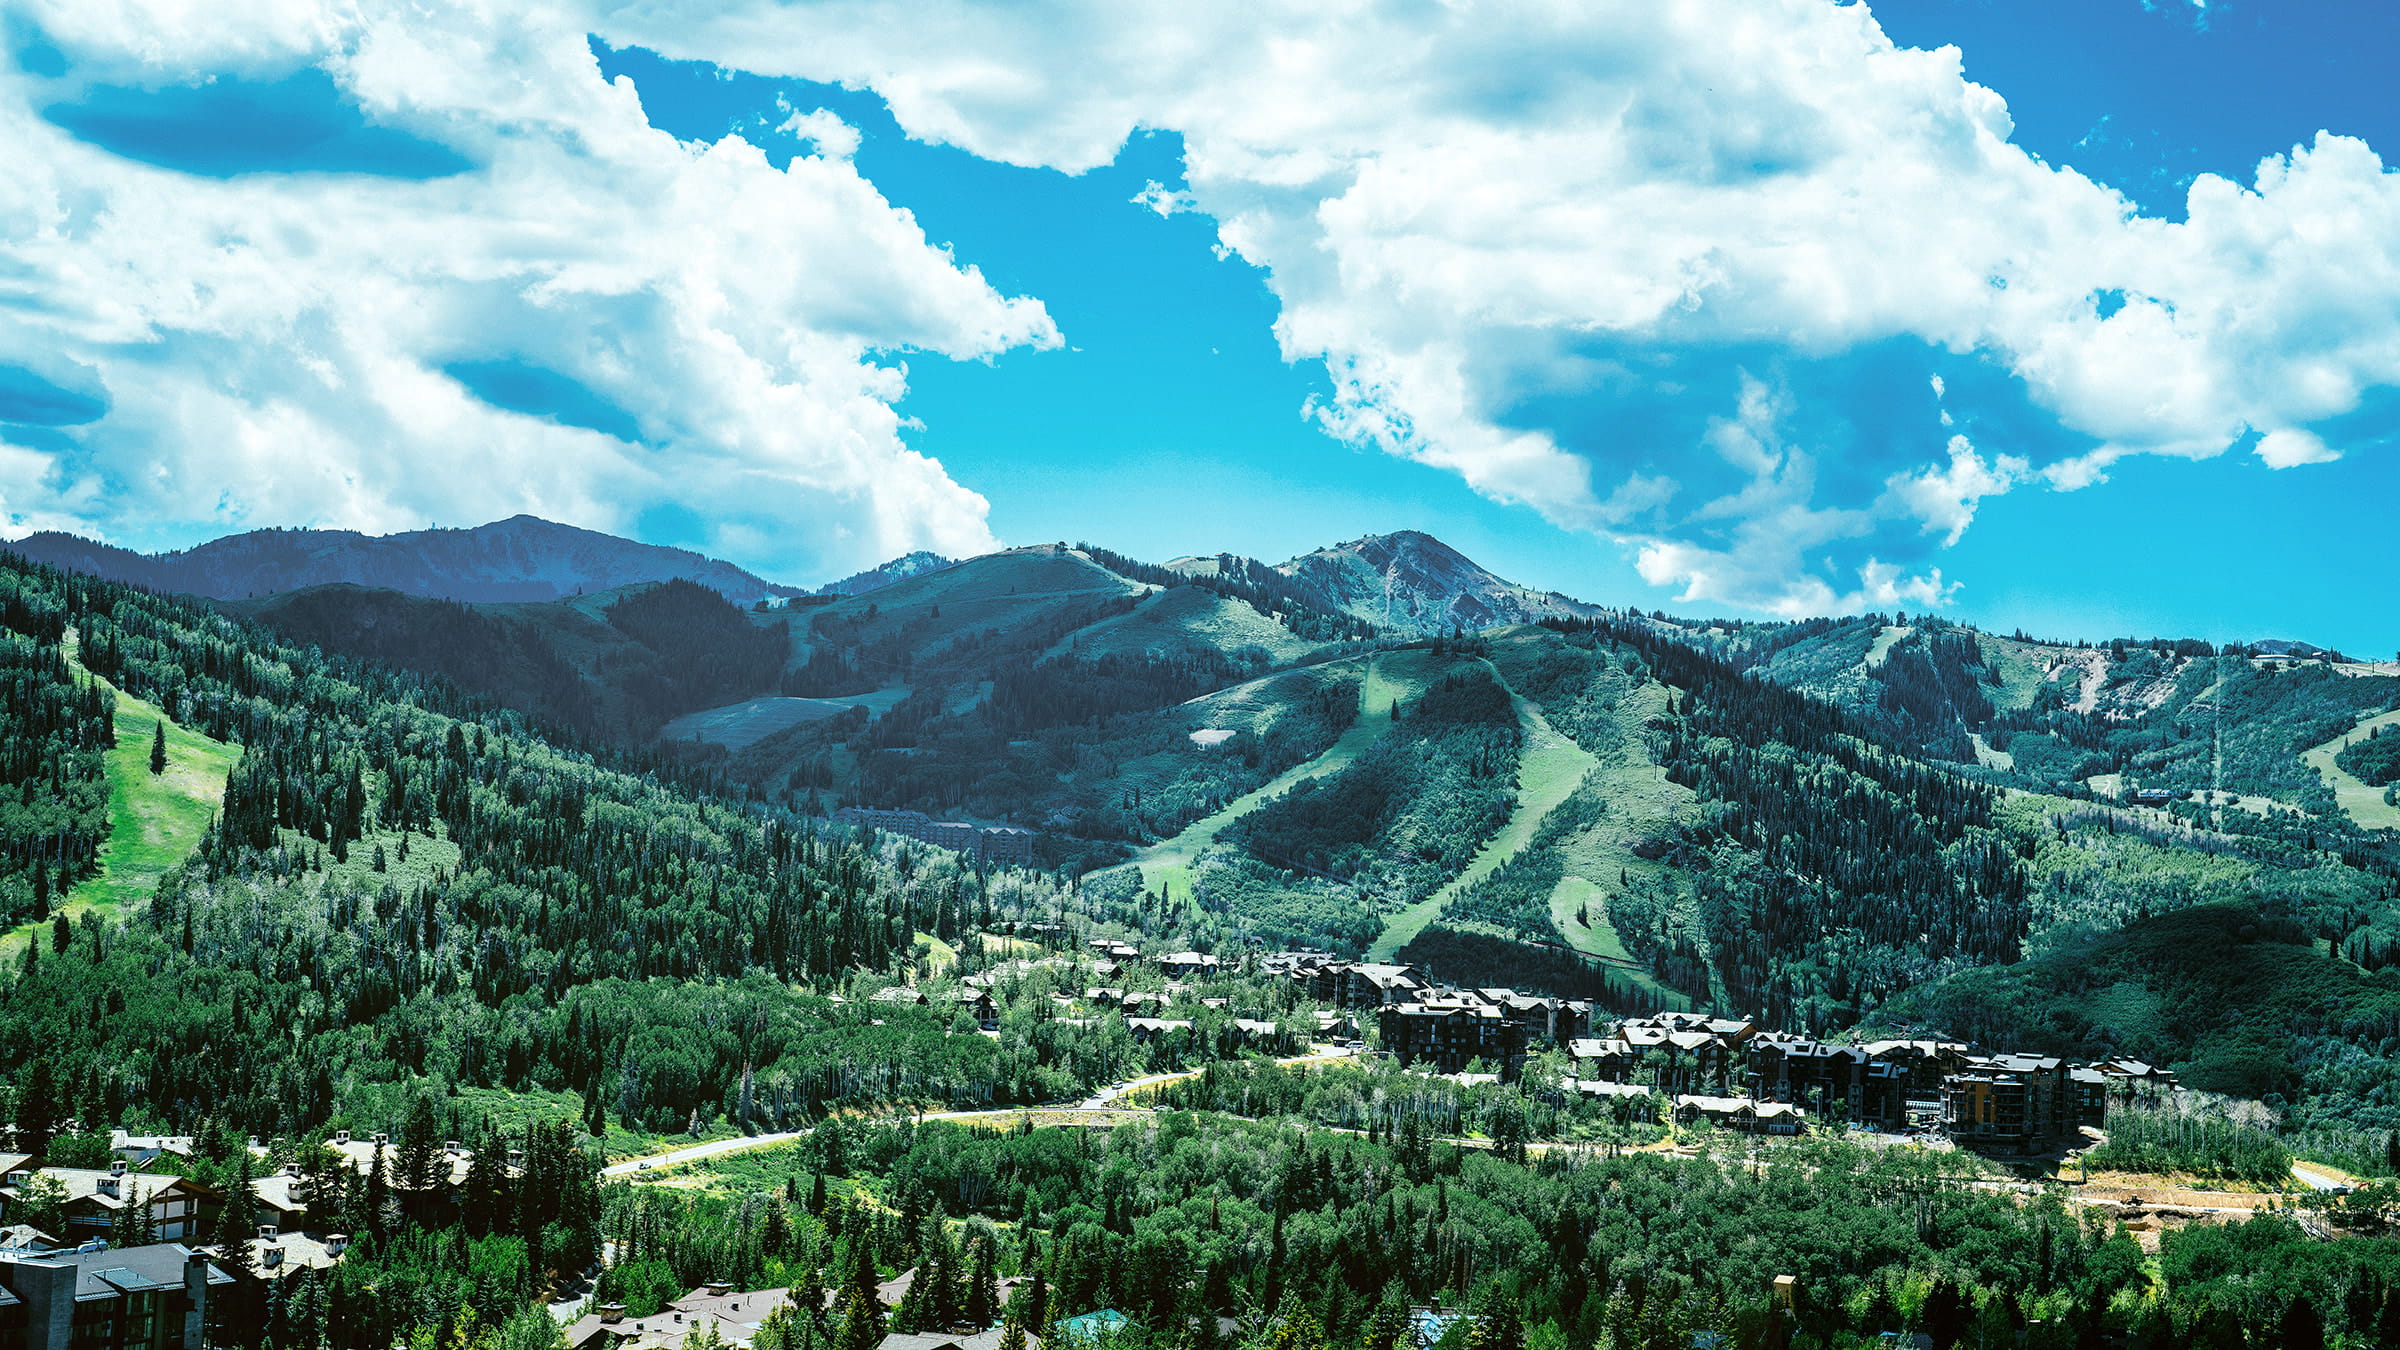 Summer in Magical Sun Valley